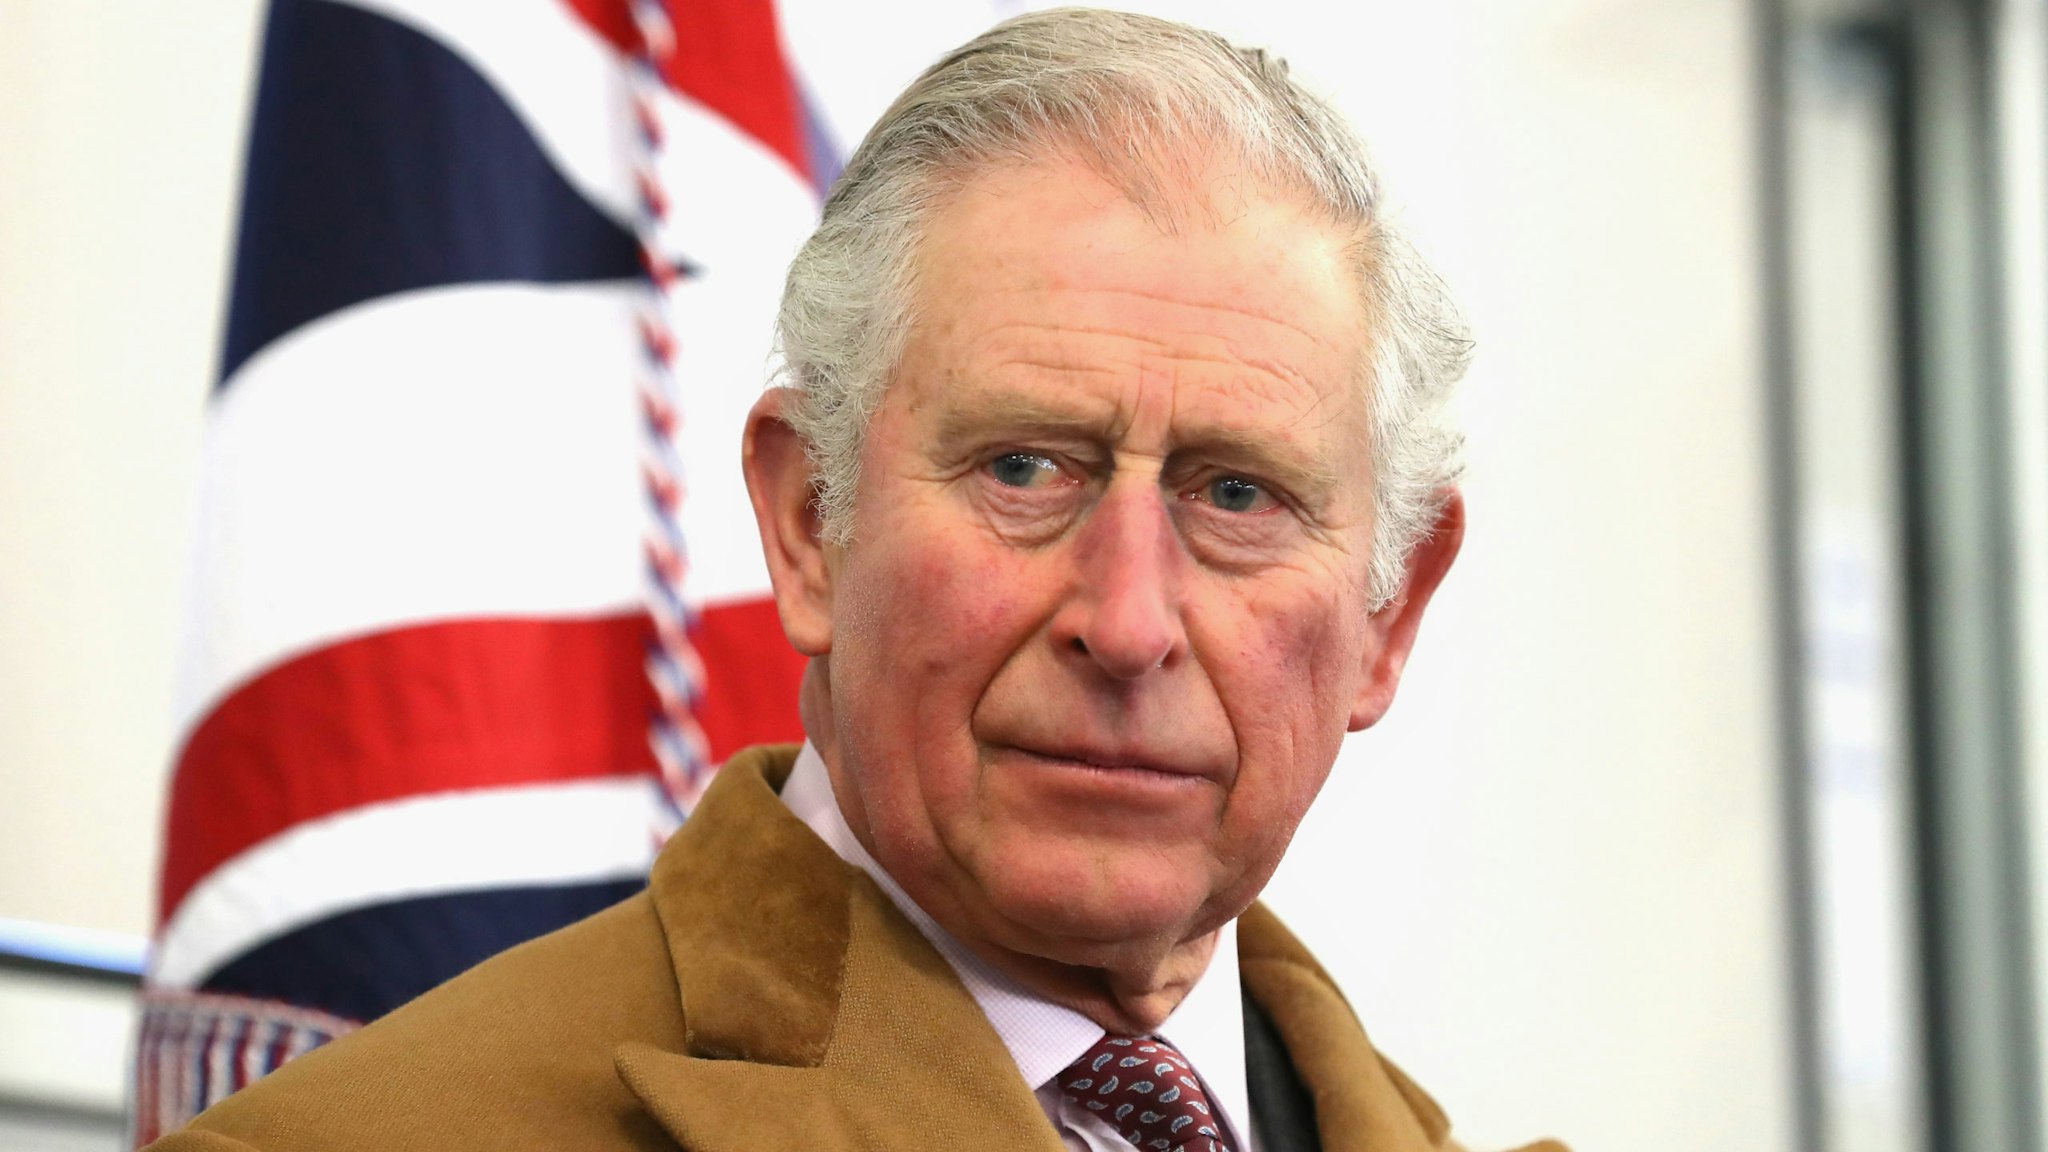 DURHAM, ENGLAND - FEBRUARY 15: Prince Charles, Prince of Wales visits the new Emergency Service Station at Barnard Castle on February 15, 2018 in Durham, England.